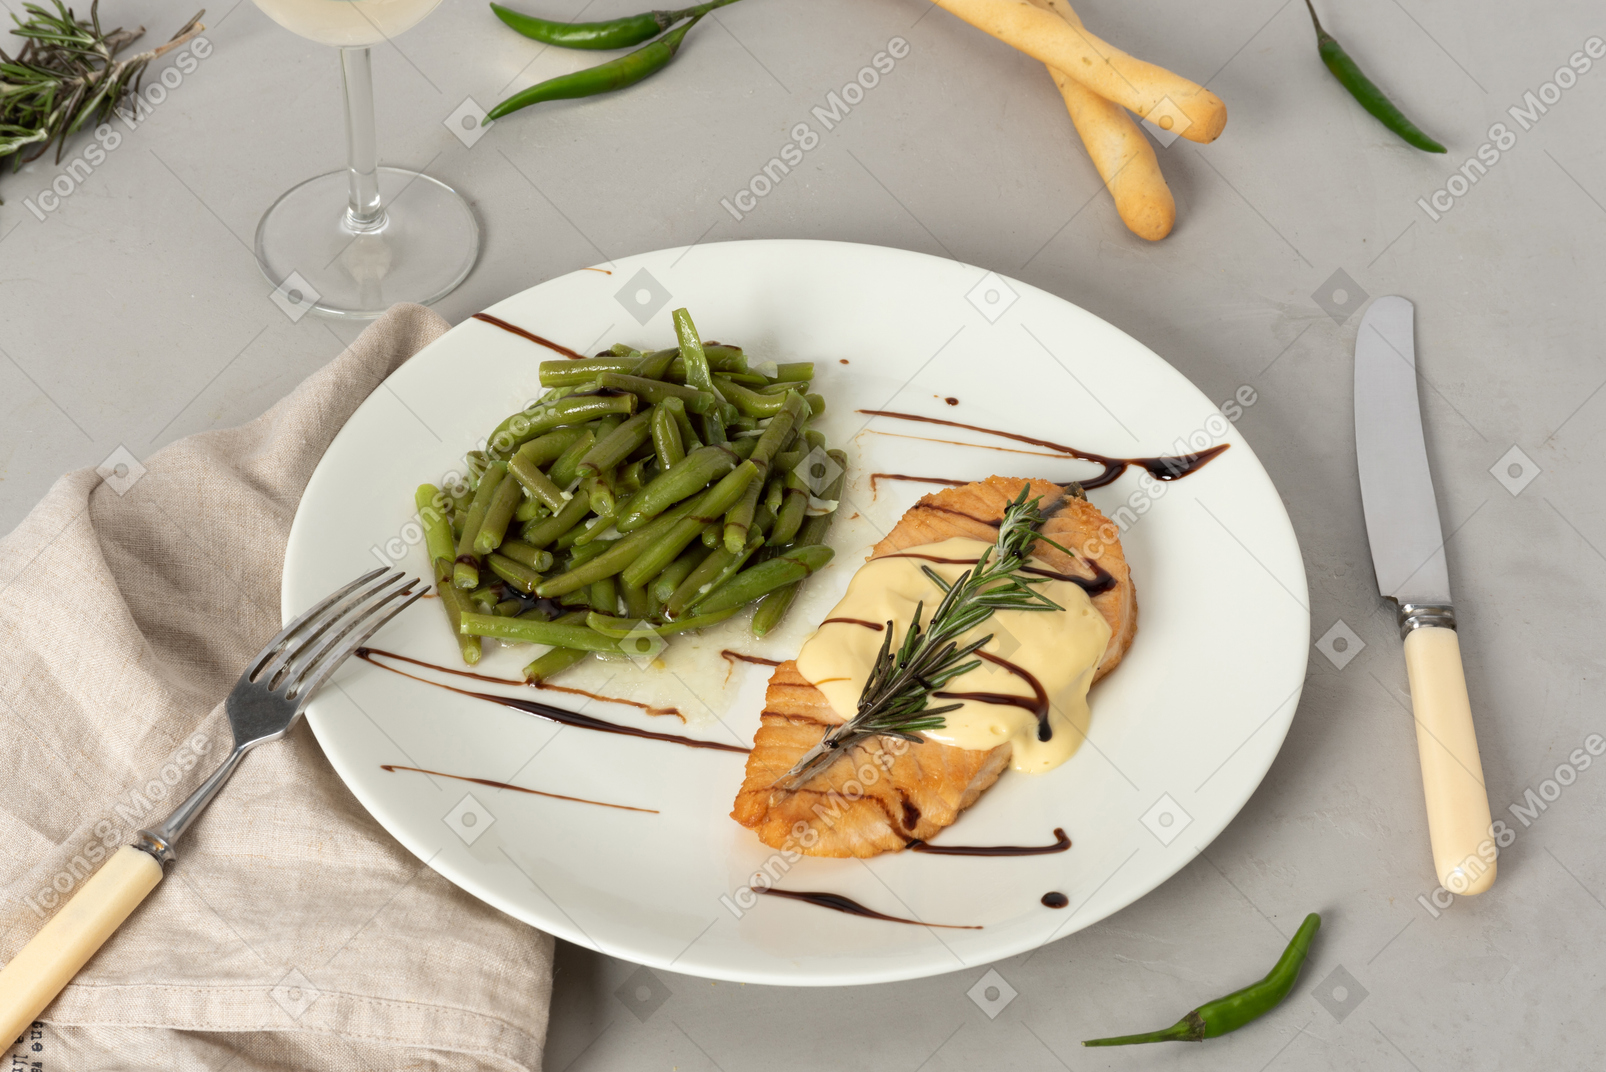 Dish of pice of salmon with sauce and string beans